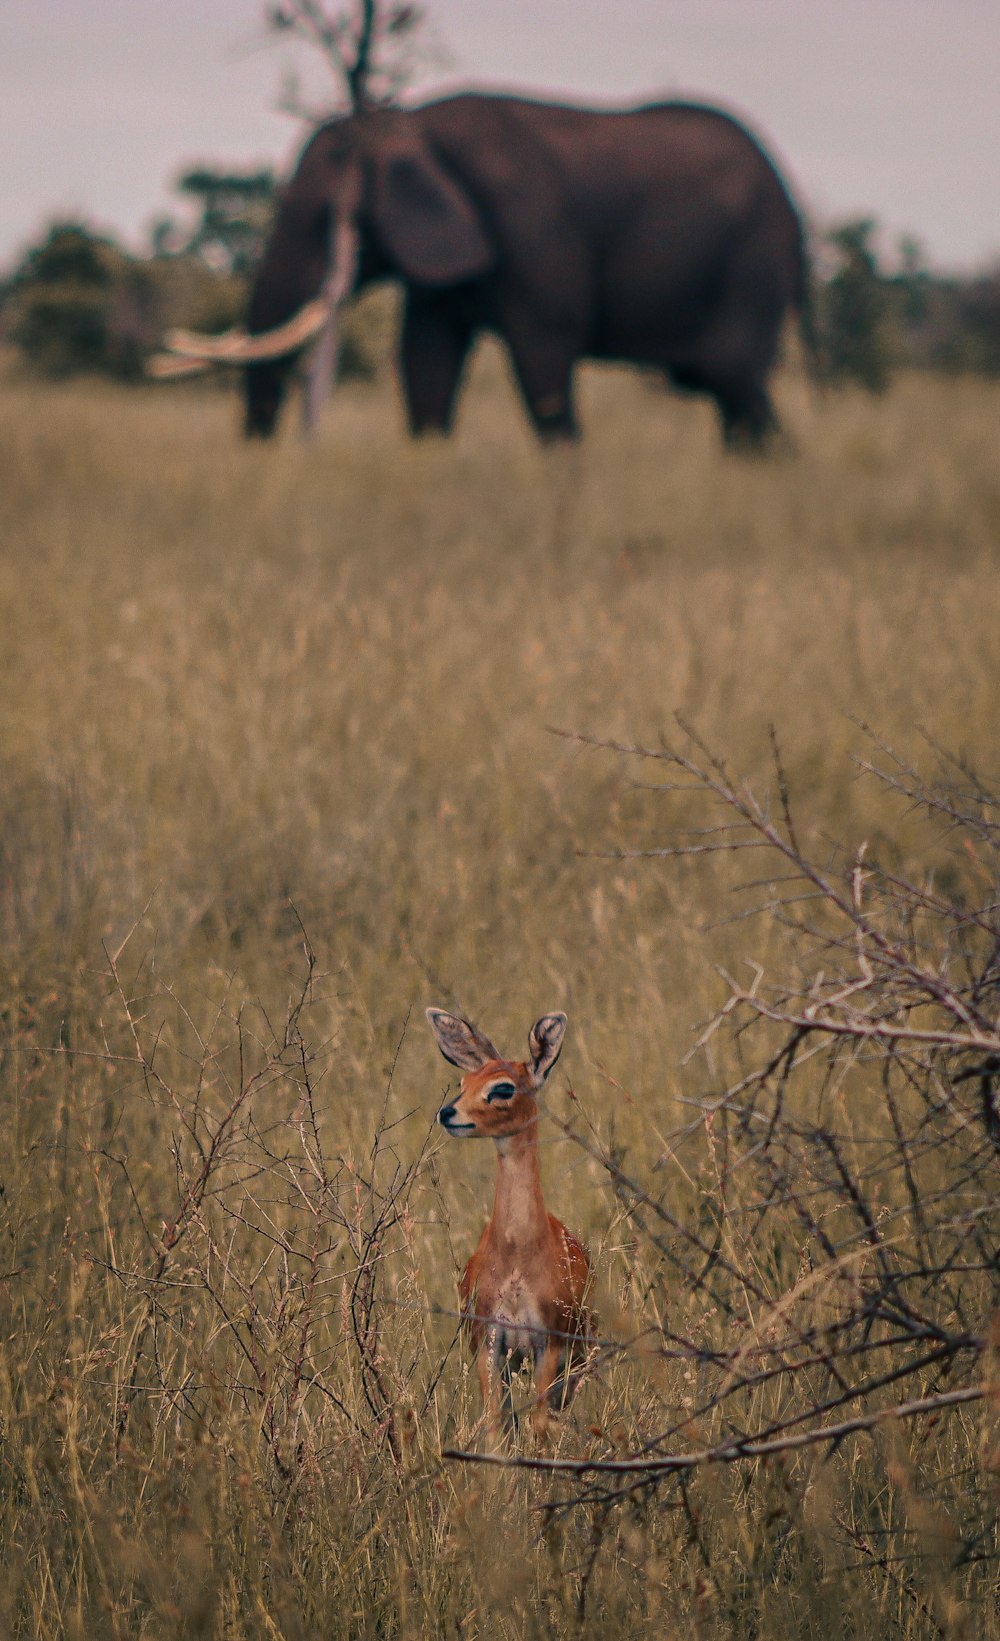 an elephant and a deer in a field